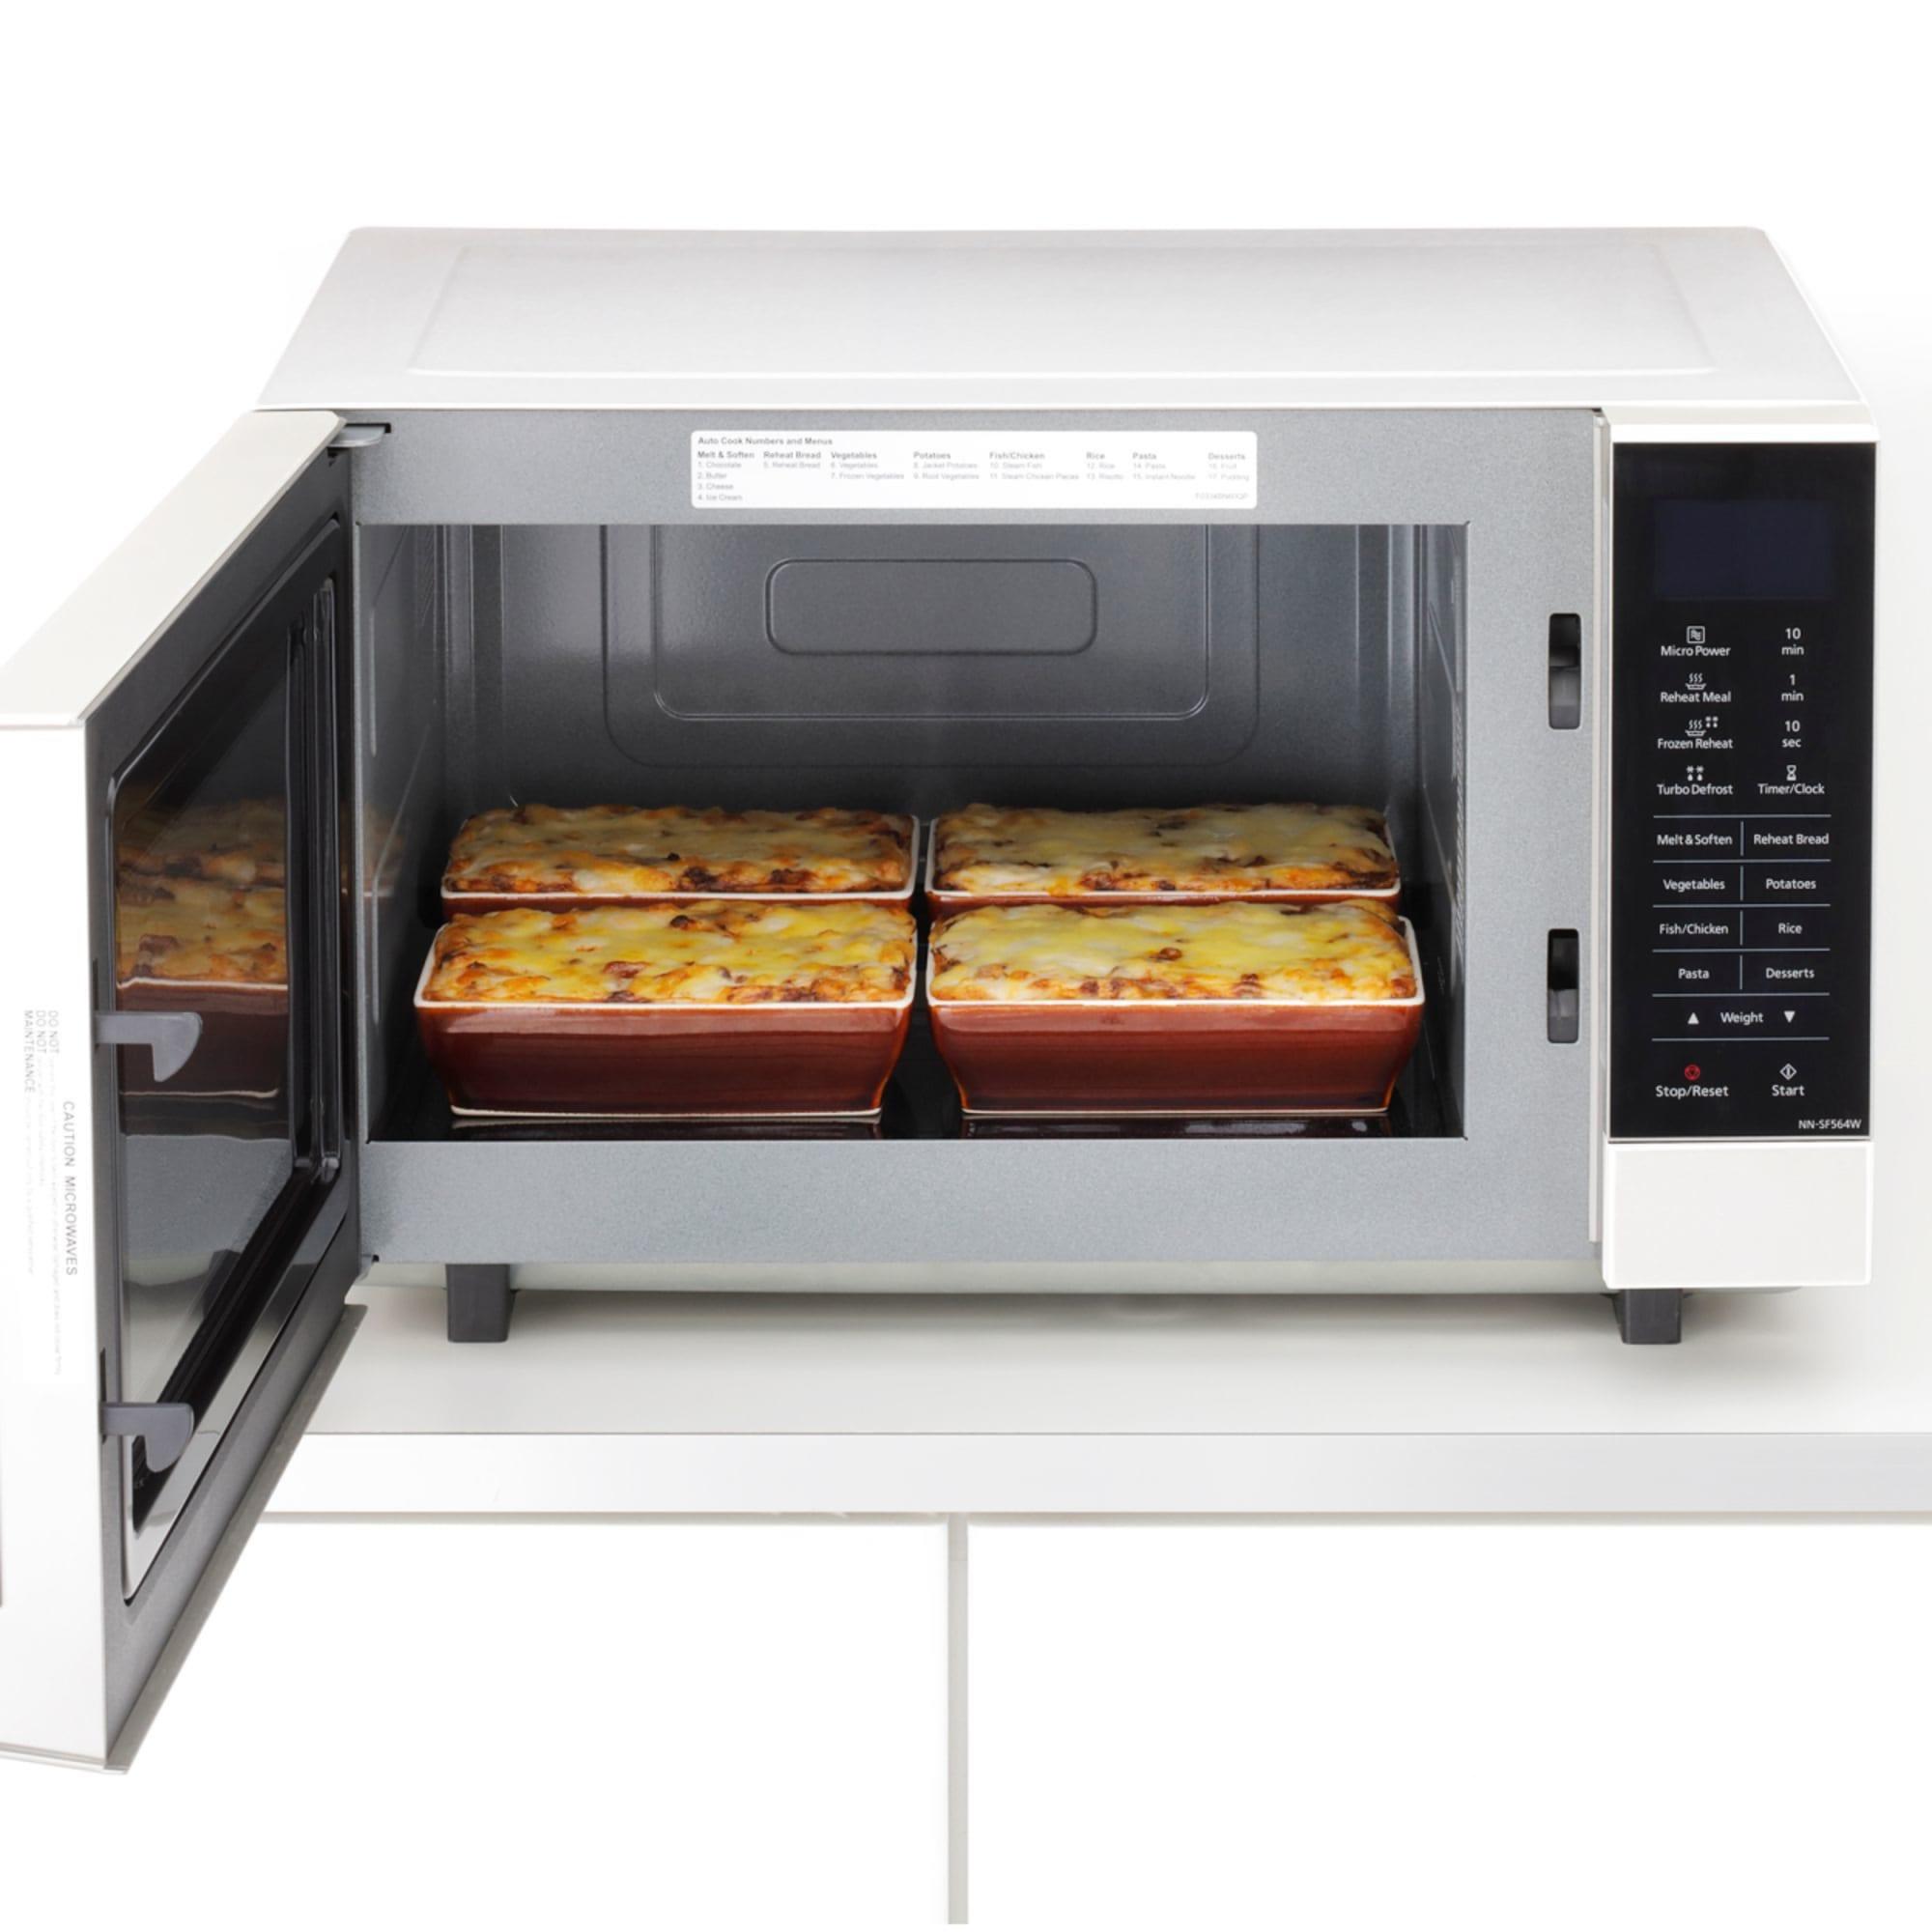 Panasonic Flatbed Microwave Oven 27L White Image 4